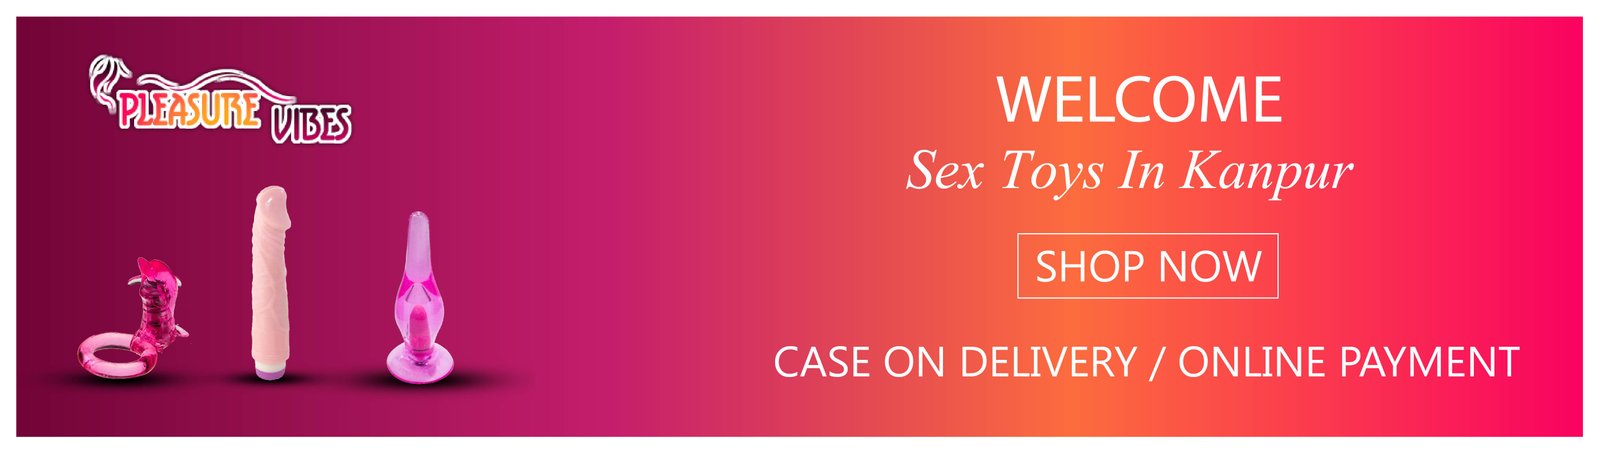 Sex toys in Kanpur -if you are looking for something that would heat up every corner of your bedroom, the collection of online sex toys in Kanpur would be worth